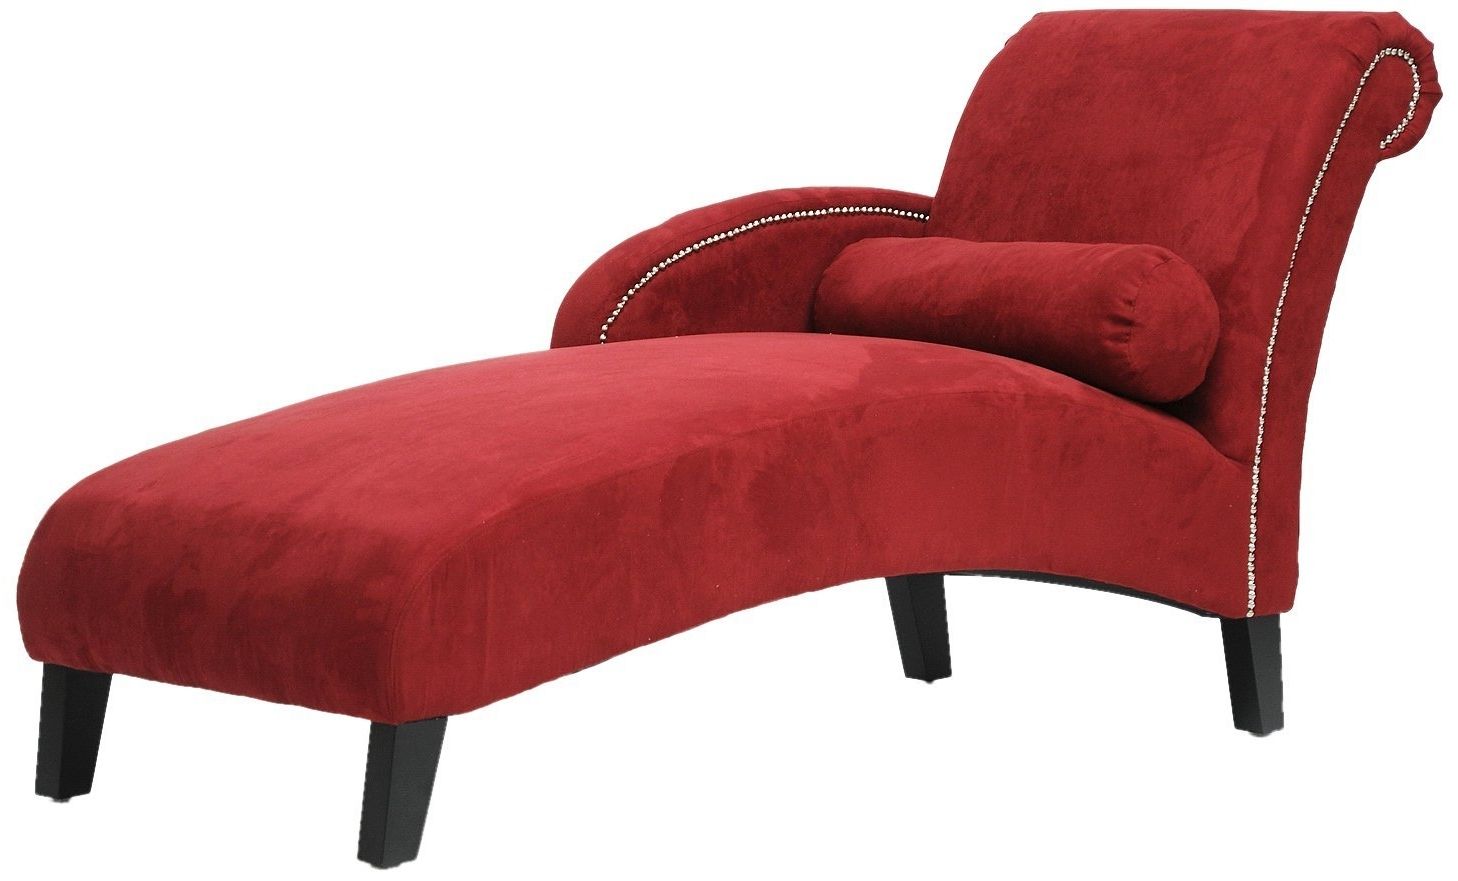 Latest Amazon: Baxton Studio Hestia Microfiber Modern Chaise Lounge Inside Red Chaise Lounges (View 4 of 15)